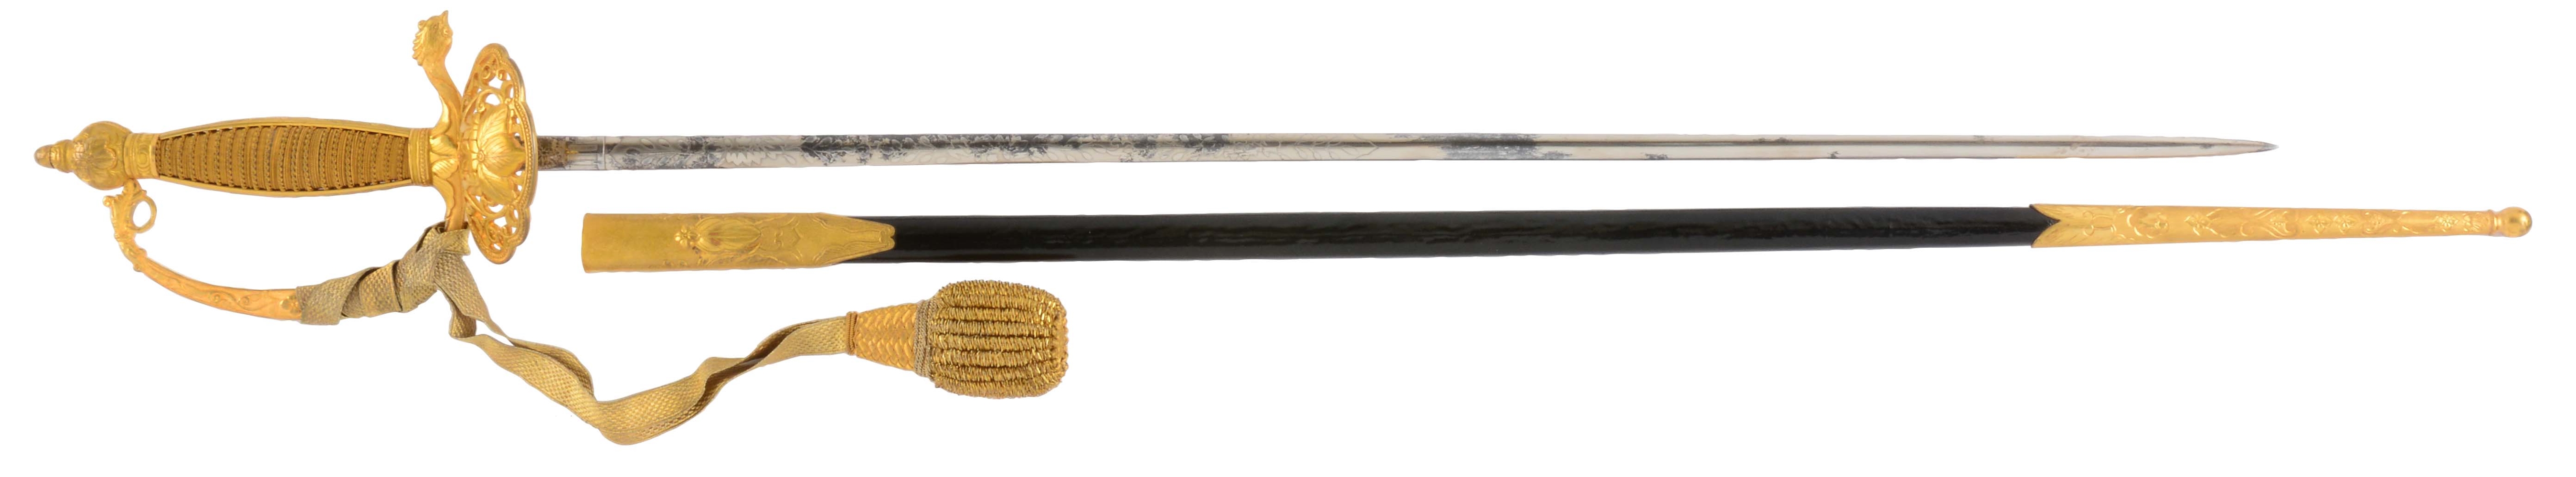 VERY FINE & RARE JAPANESE DIPLOMATS SHORT SWORD, PRE-WWII, IN PRISTINE AS FOUND CONDITION.